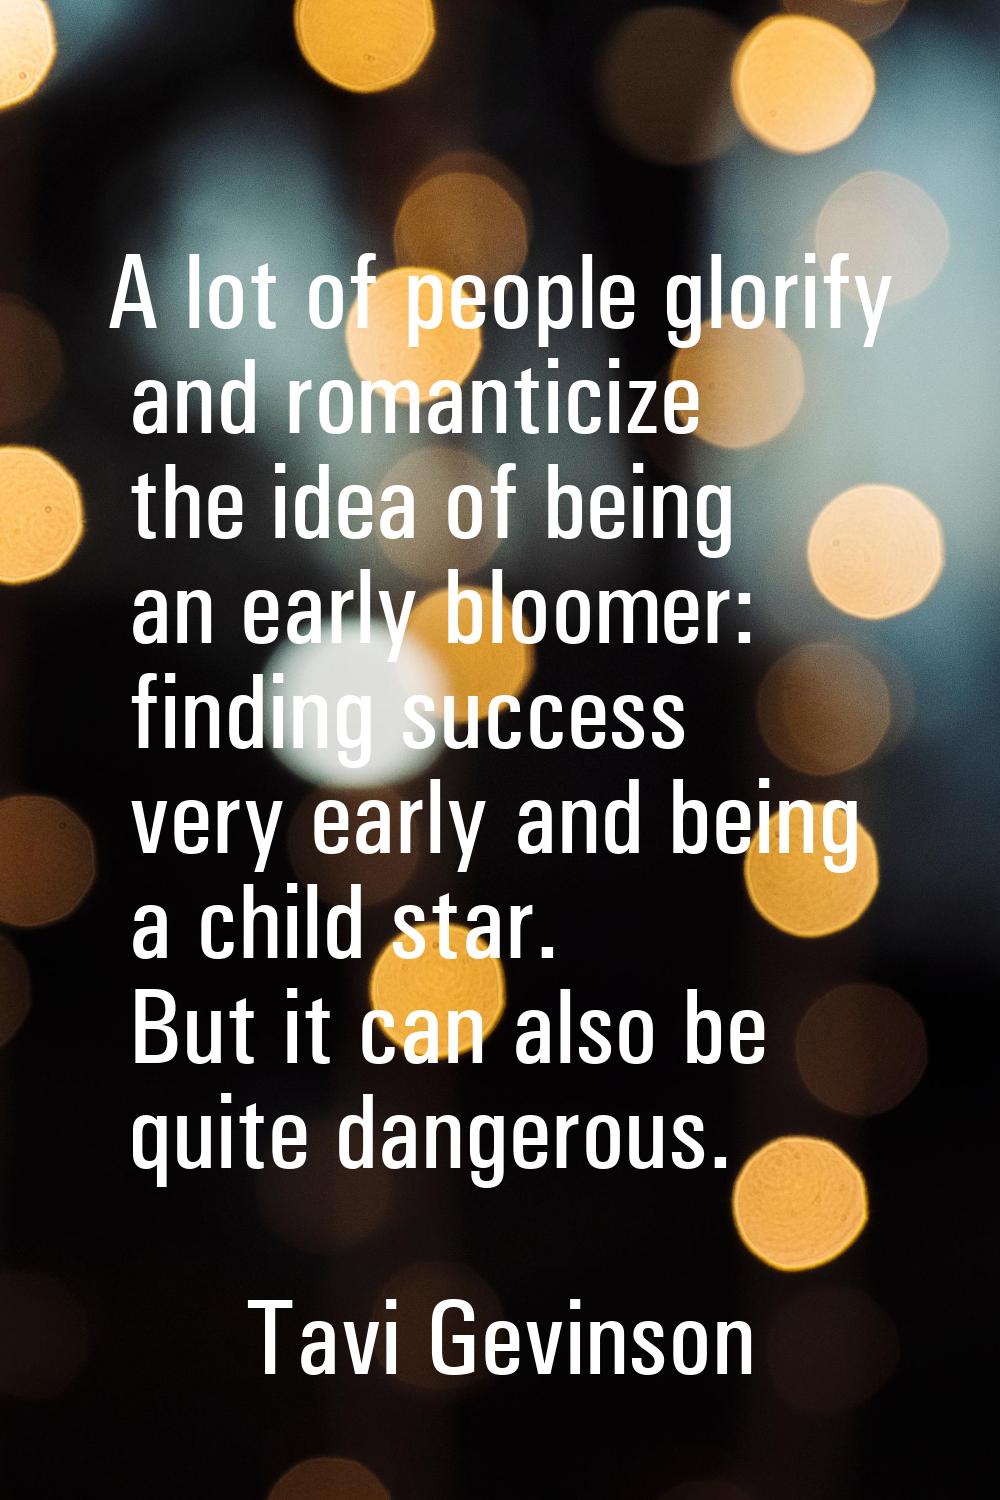 A lot of people glorify and romanticize the idea of being an early bloomer: finding success very ea